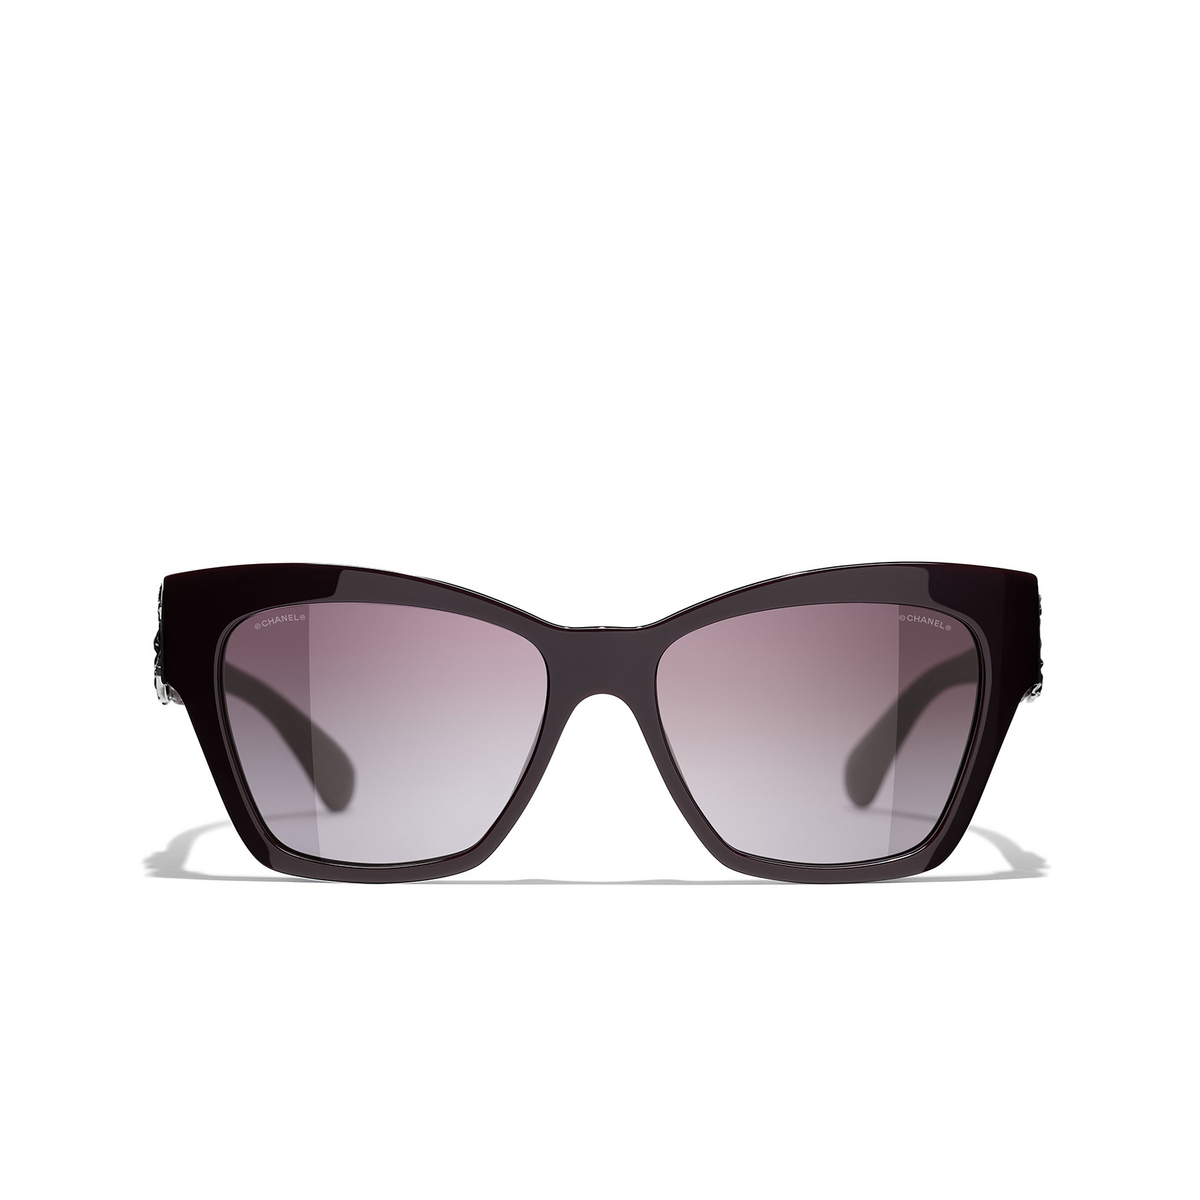 CHANEL butterfly Sunglasses 1461S1 Burgundy - front view